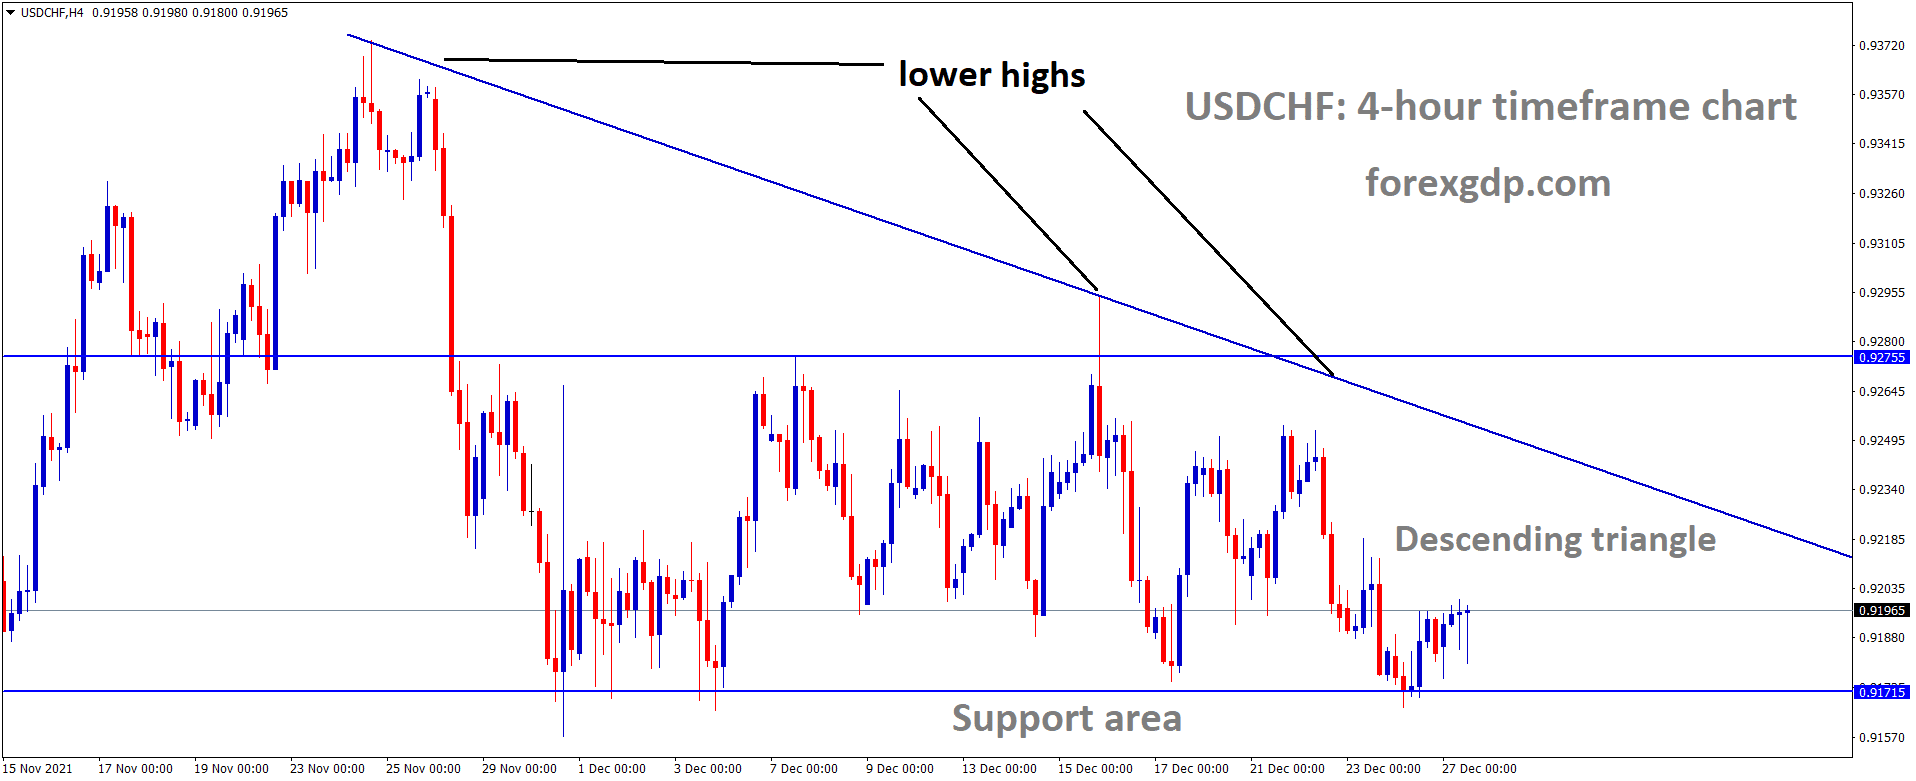 USDCHF is moving in the Descending triangle pattern and the market has rebounded from the support area of the triangle pattern